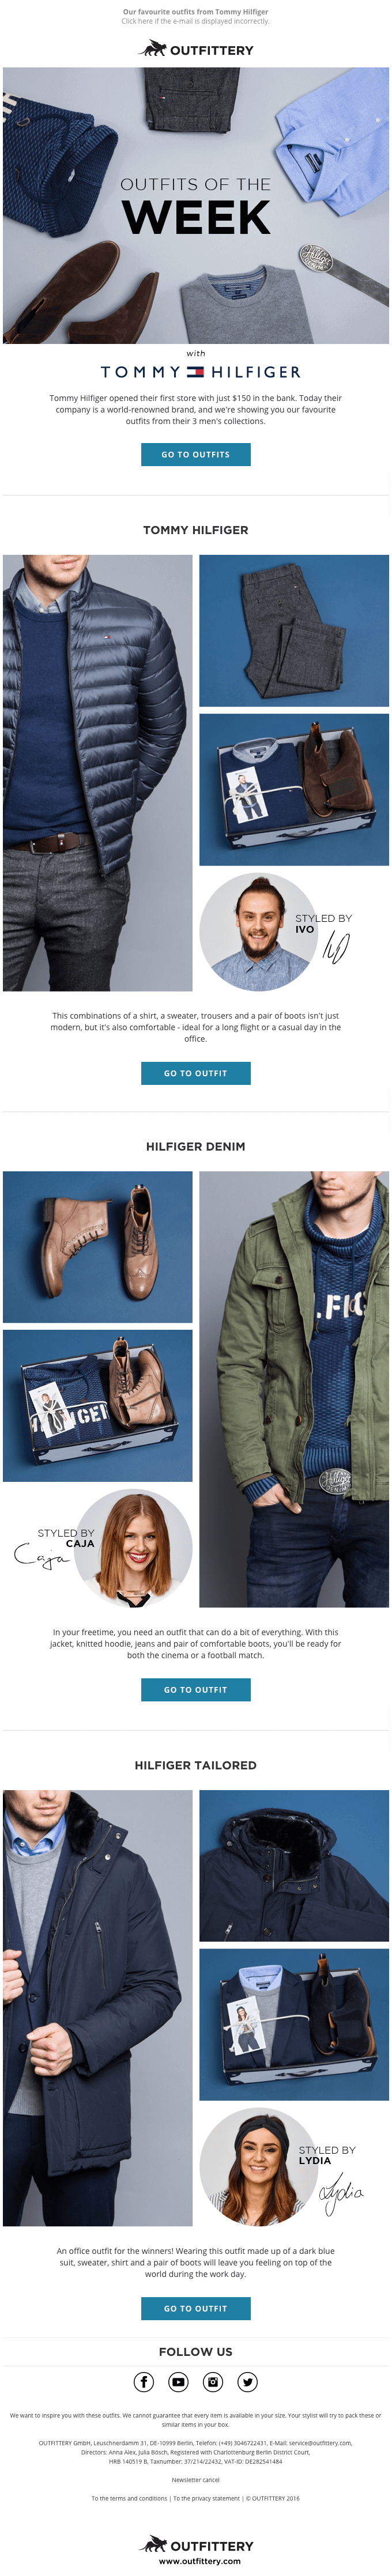 outfittery email example